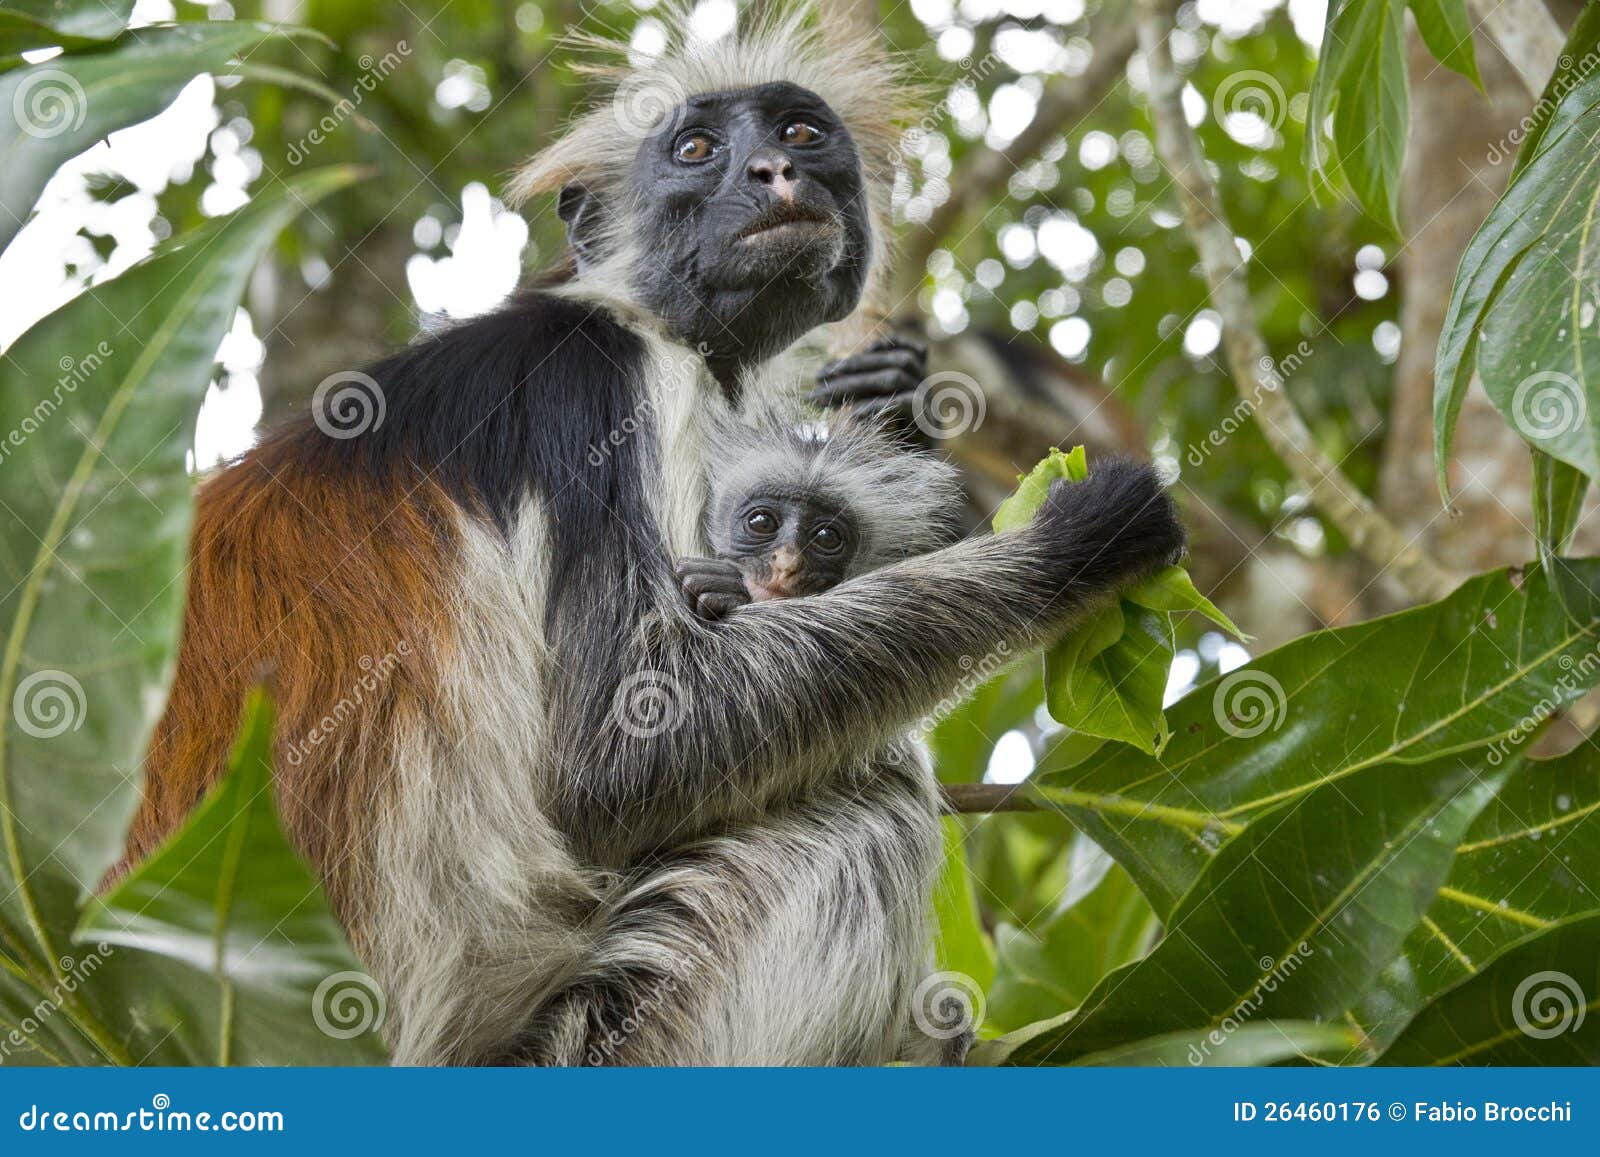 rare red colobus monkey with little